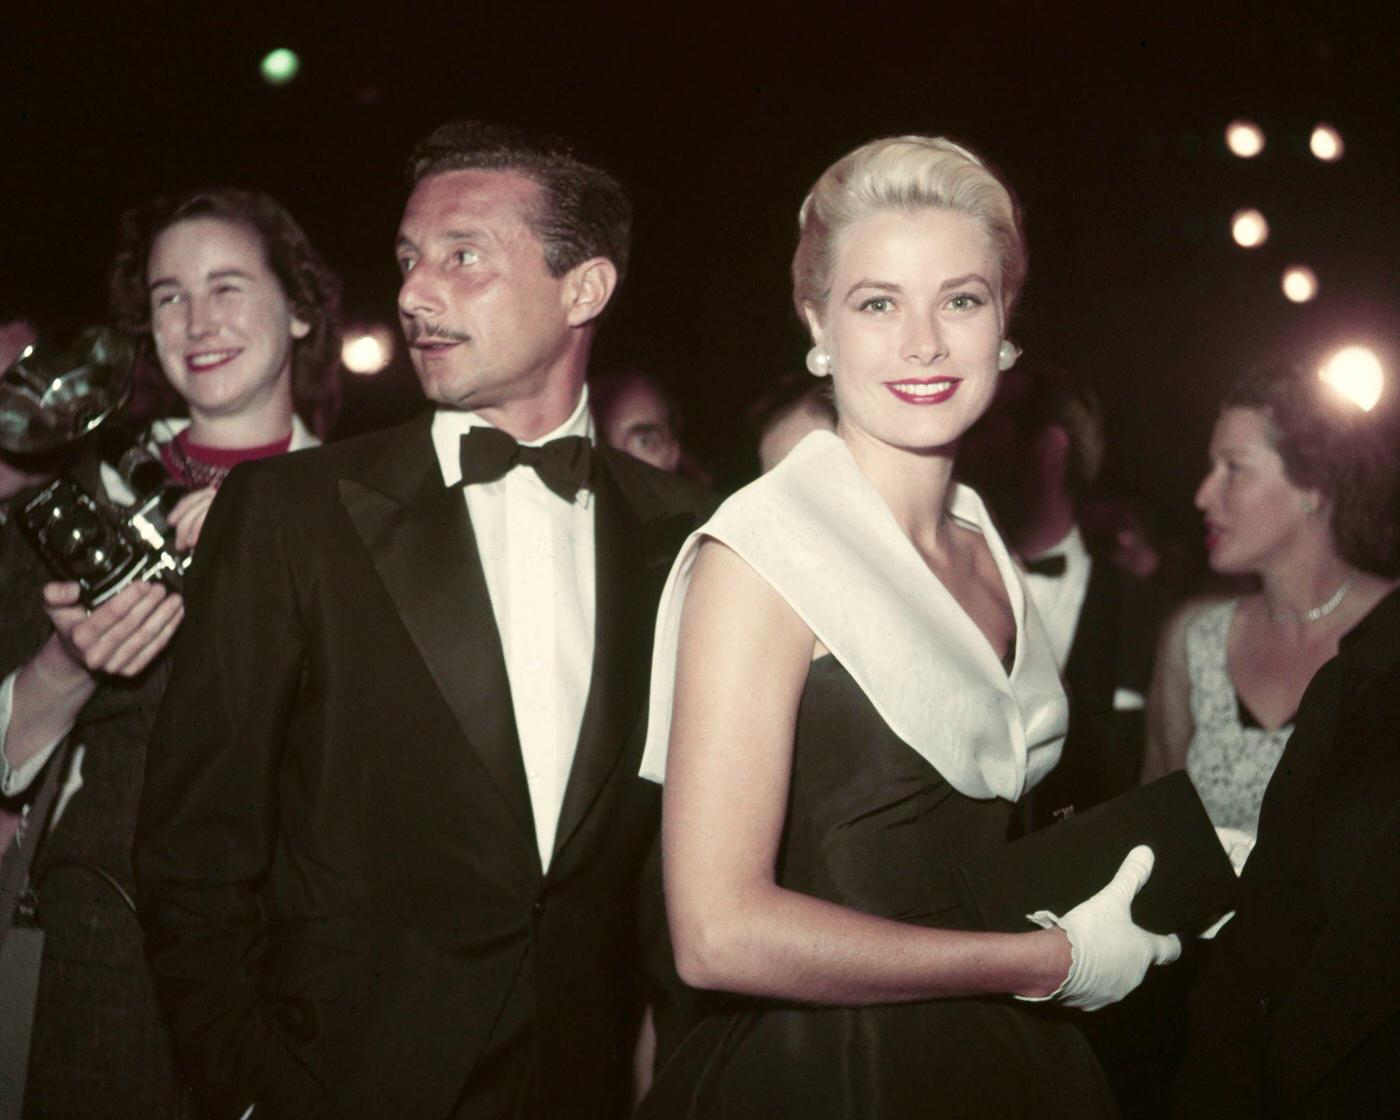 Grace Kelly attends the premiere of the film 'Rear Window' with fashion designer Oleg Cassini